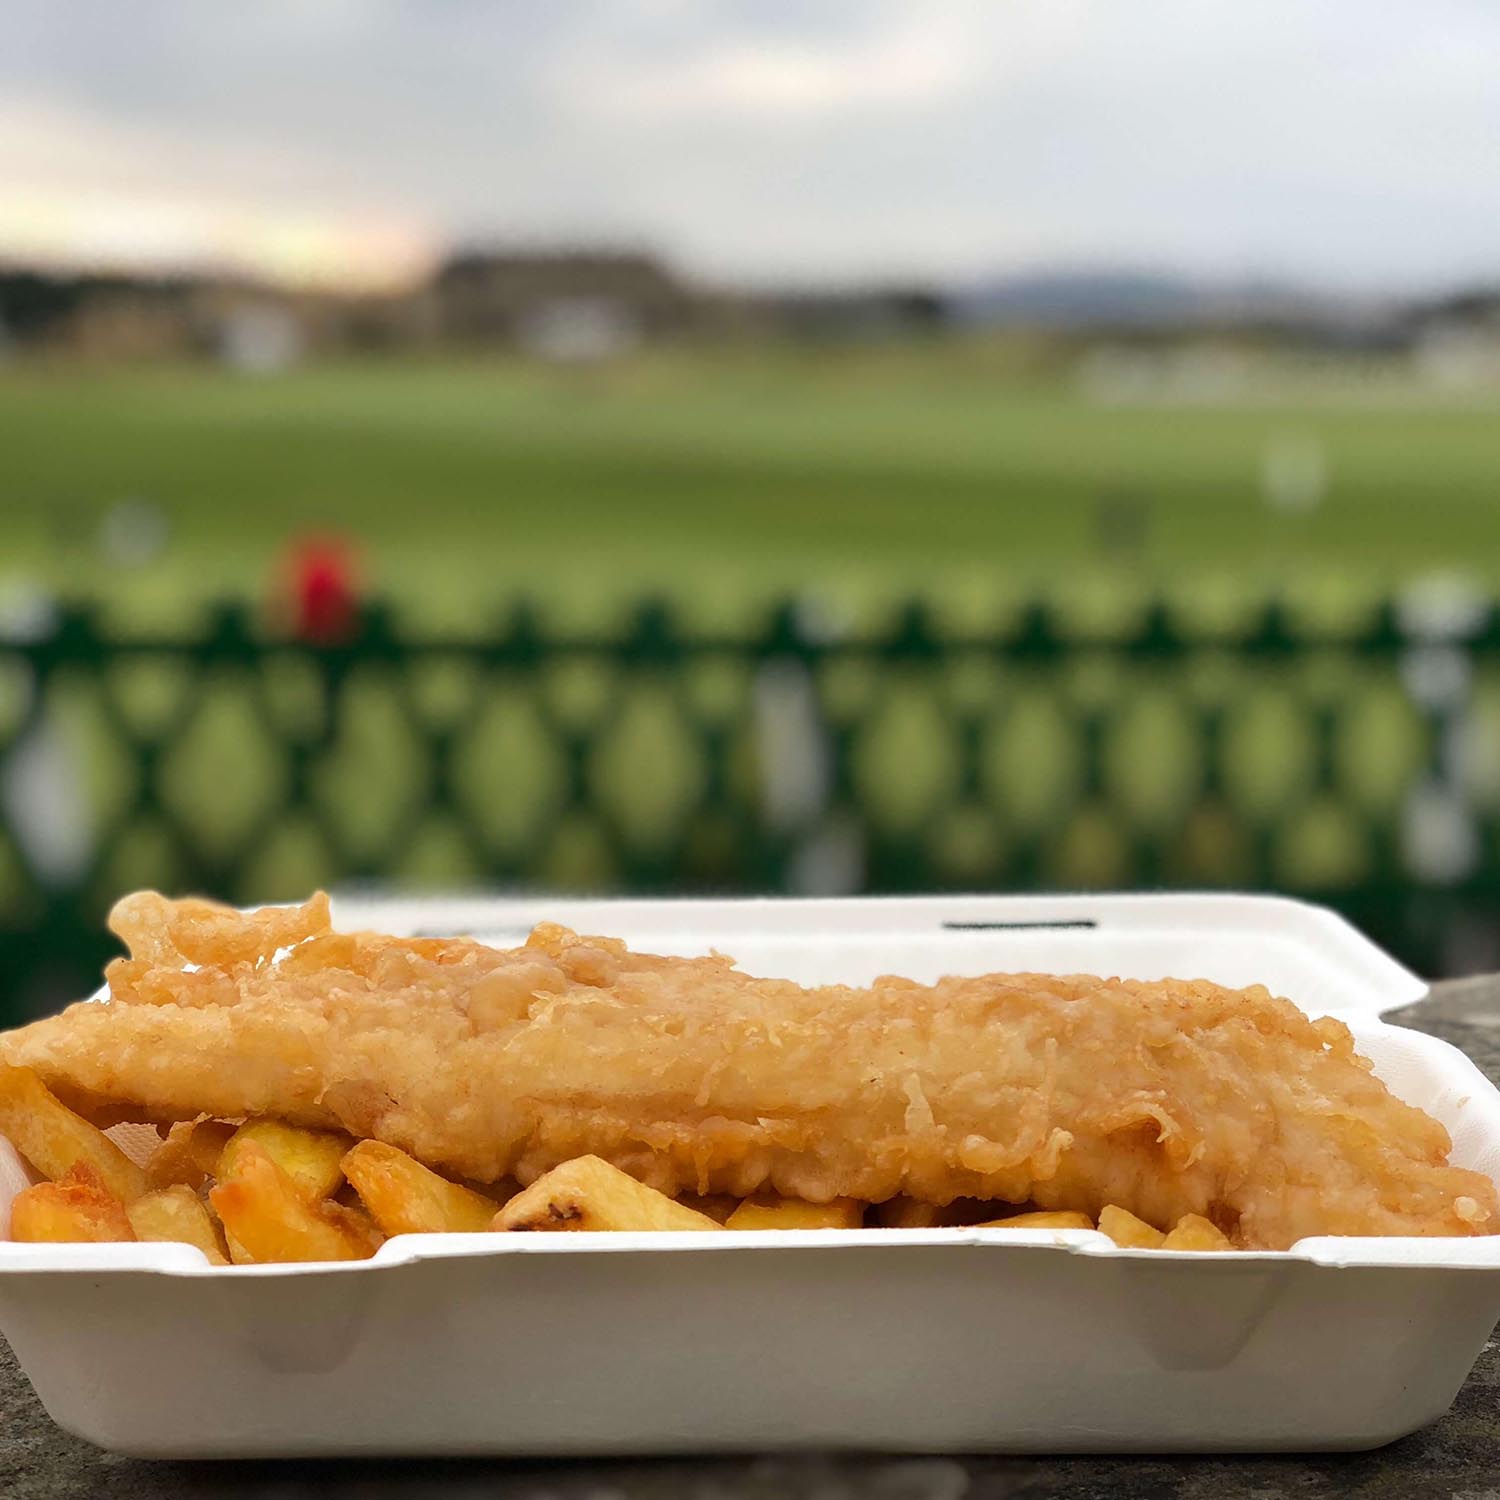 Tailend St. Andrews Fish & Chips